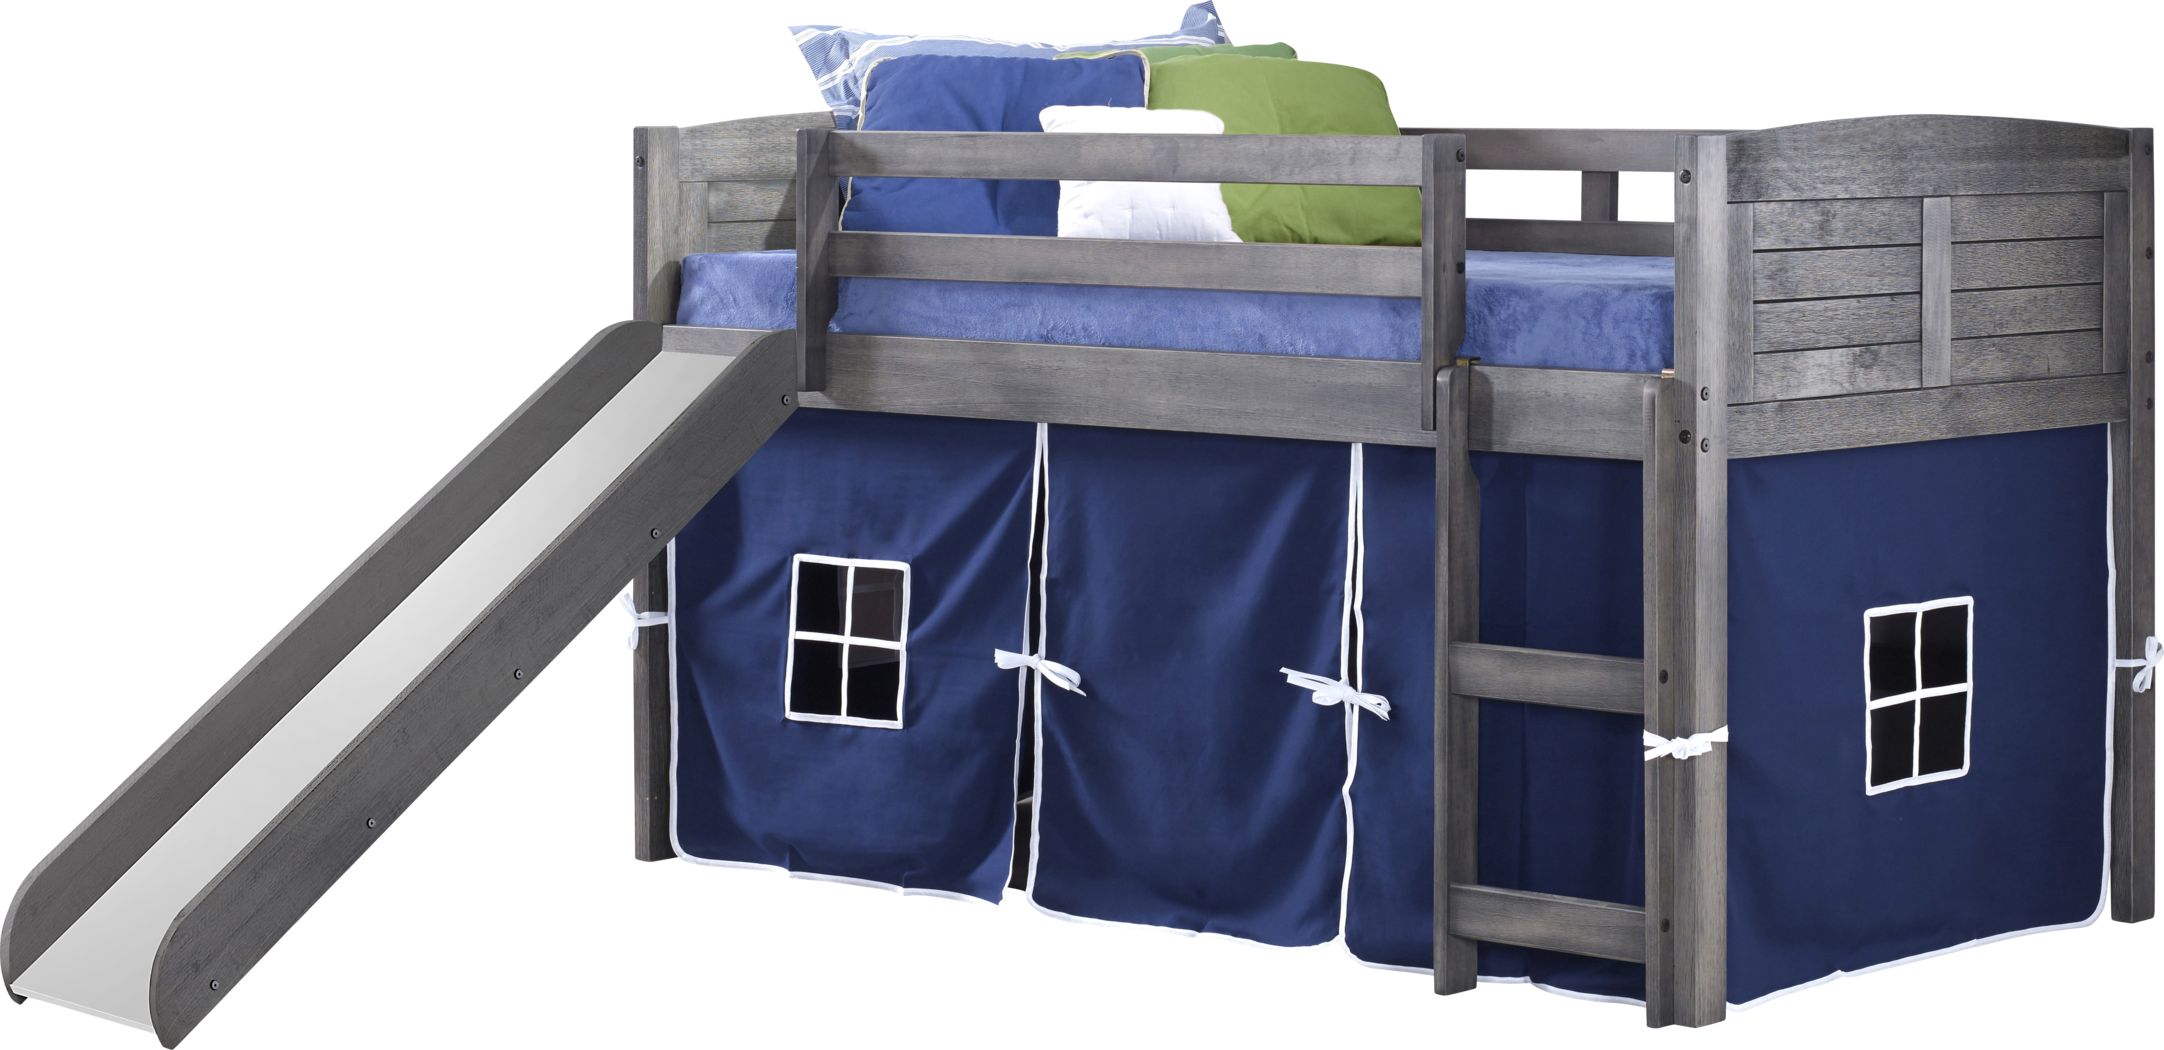 Loft Beds With Slide Underneath, Bunk Bed With Tent Underneath